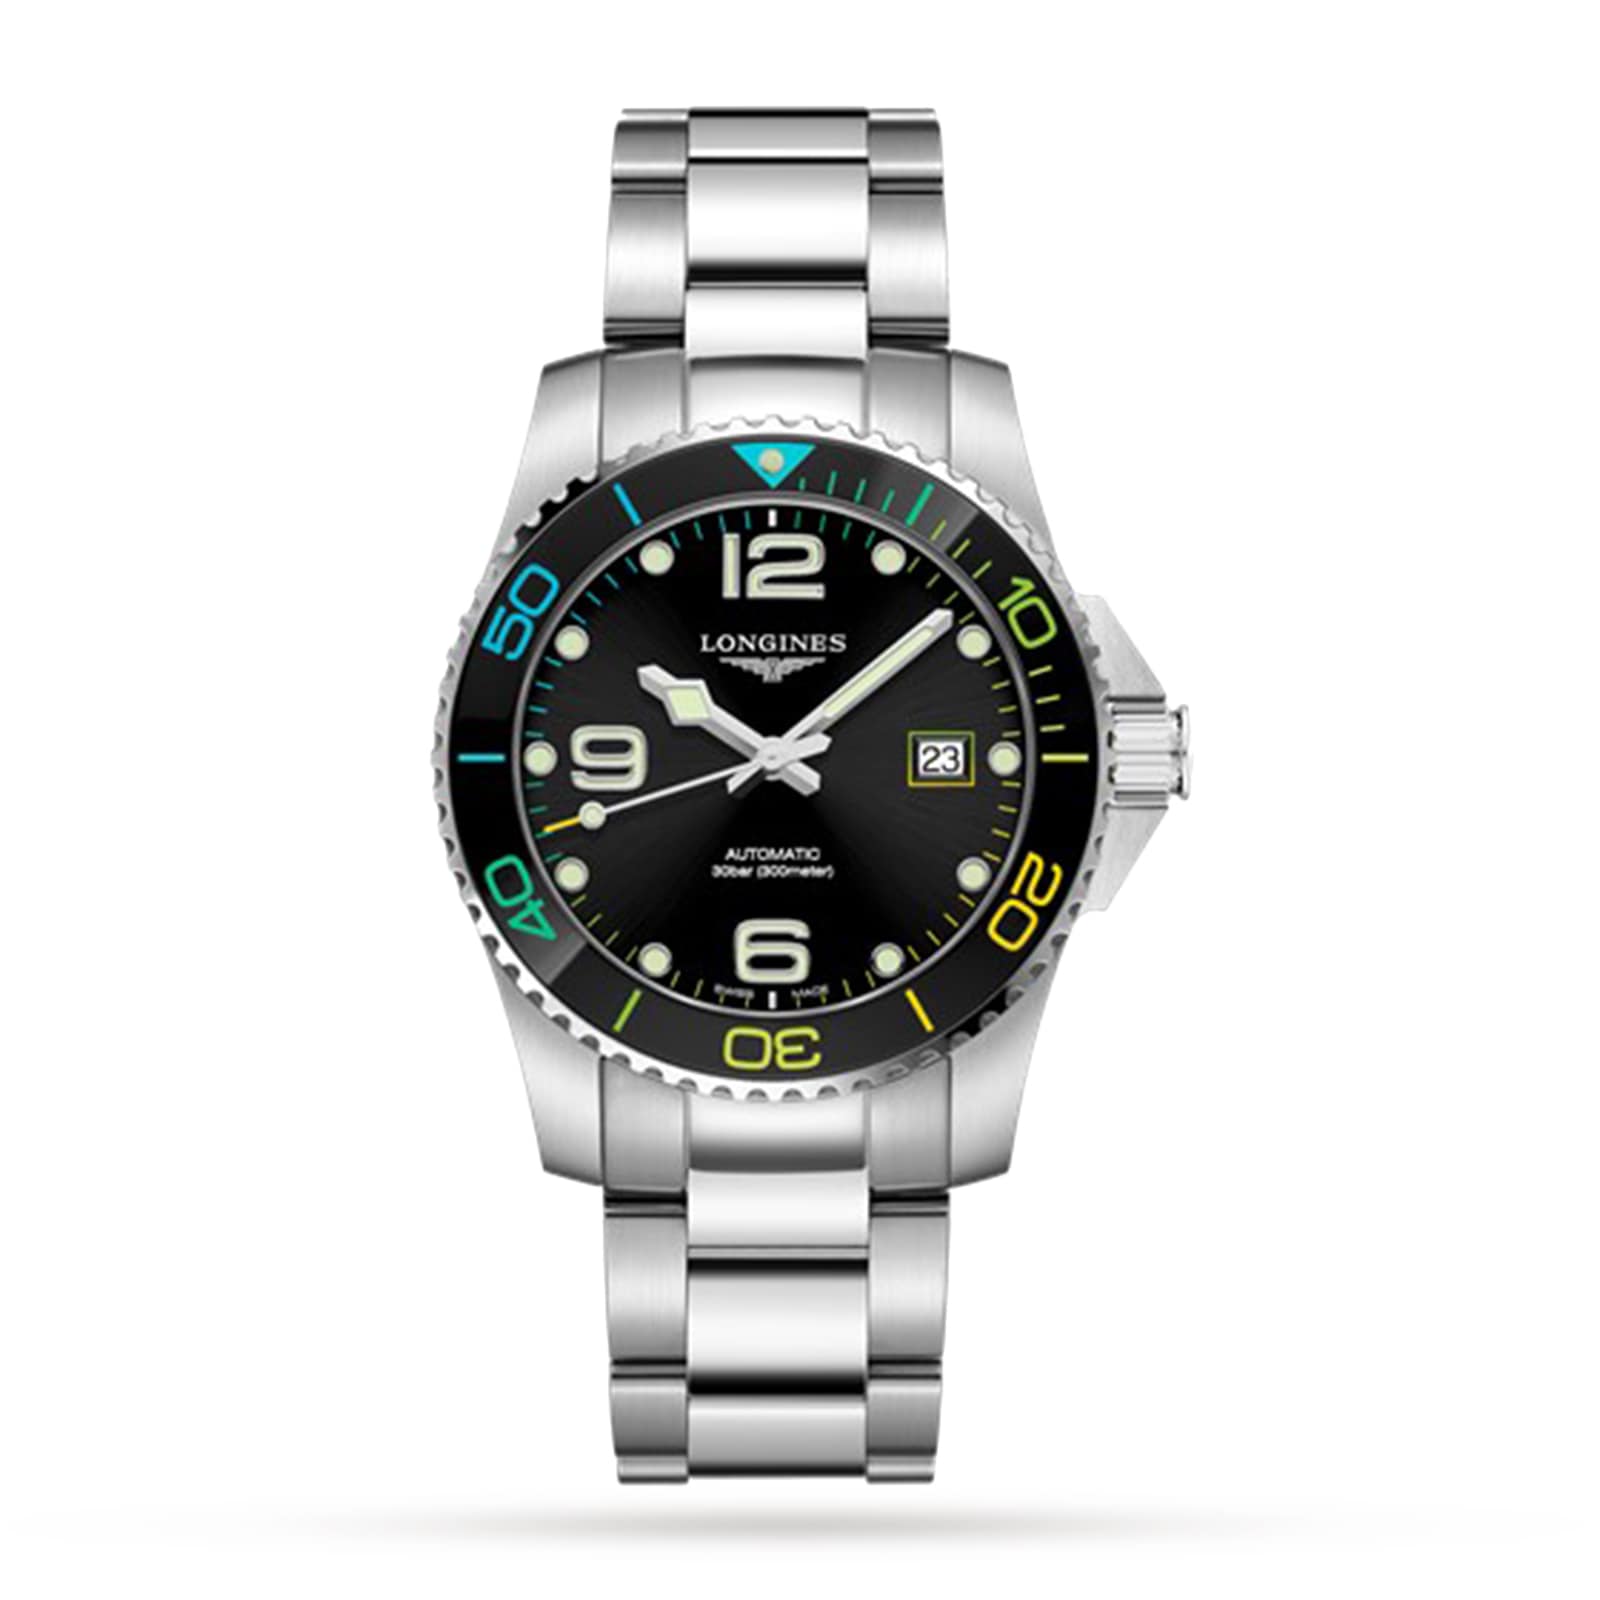 HydroConquest XXII Commonwealth Games 41mm Mens Watch - Limited to 2022 pieces